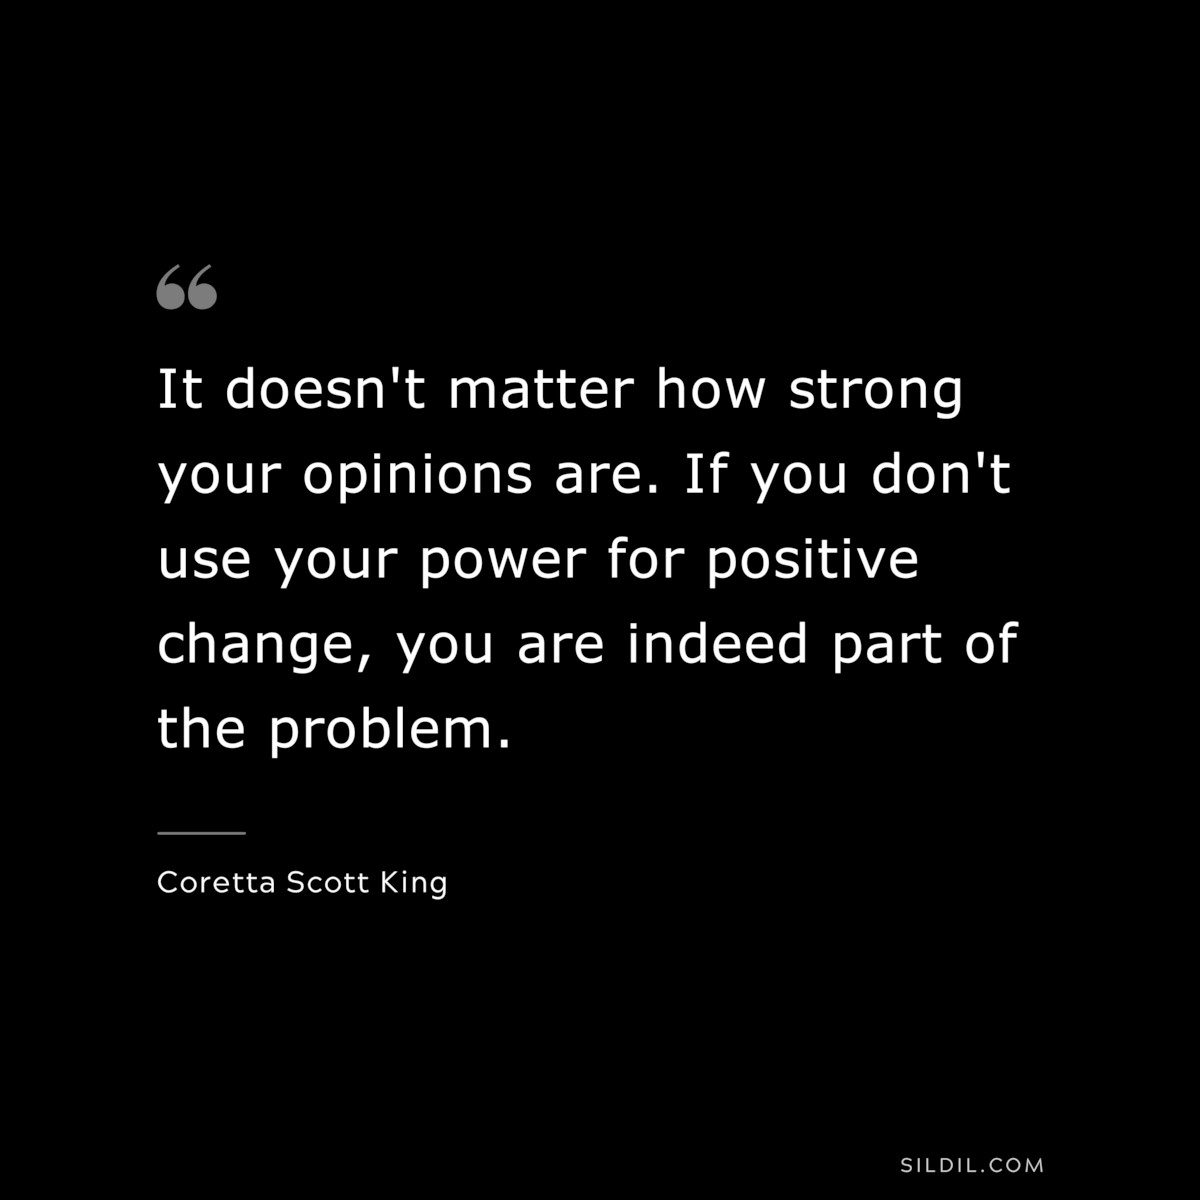 It doesn't matter how strong your opinions are. If you don't use your power for positive change, you are indeed part of the problem. ― Coretta Scott King